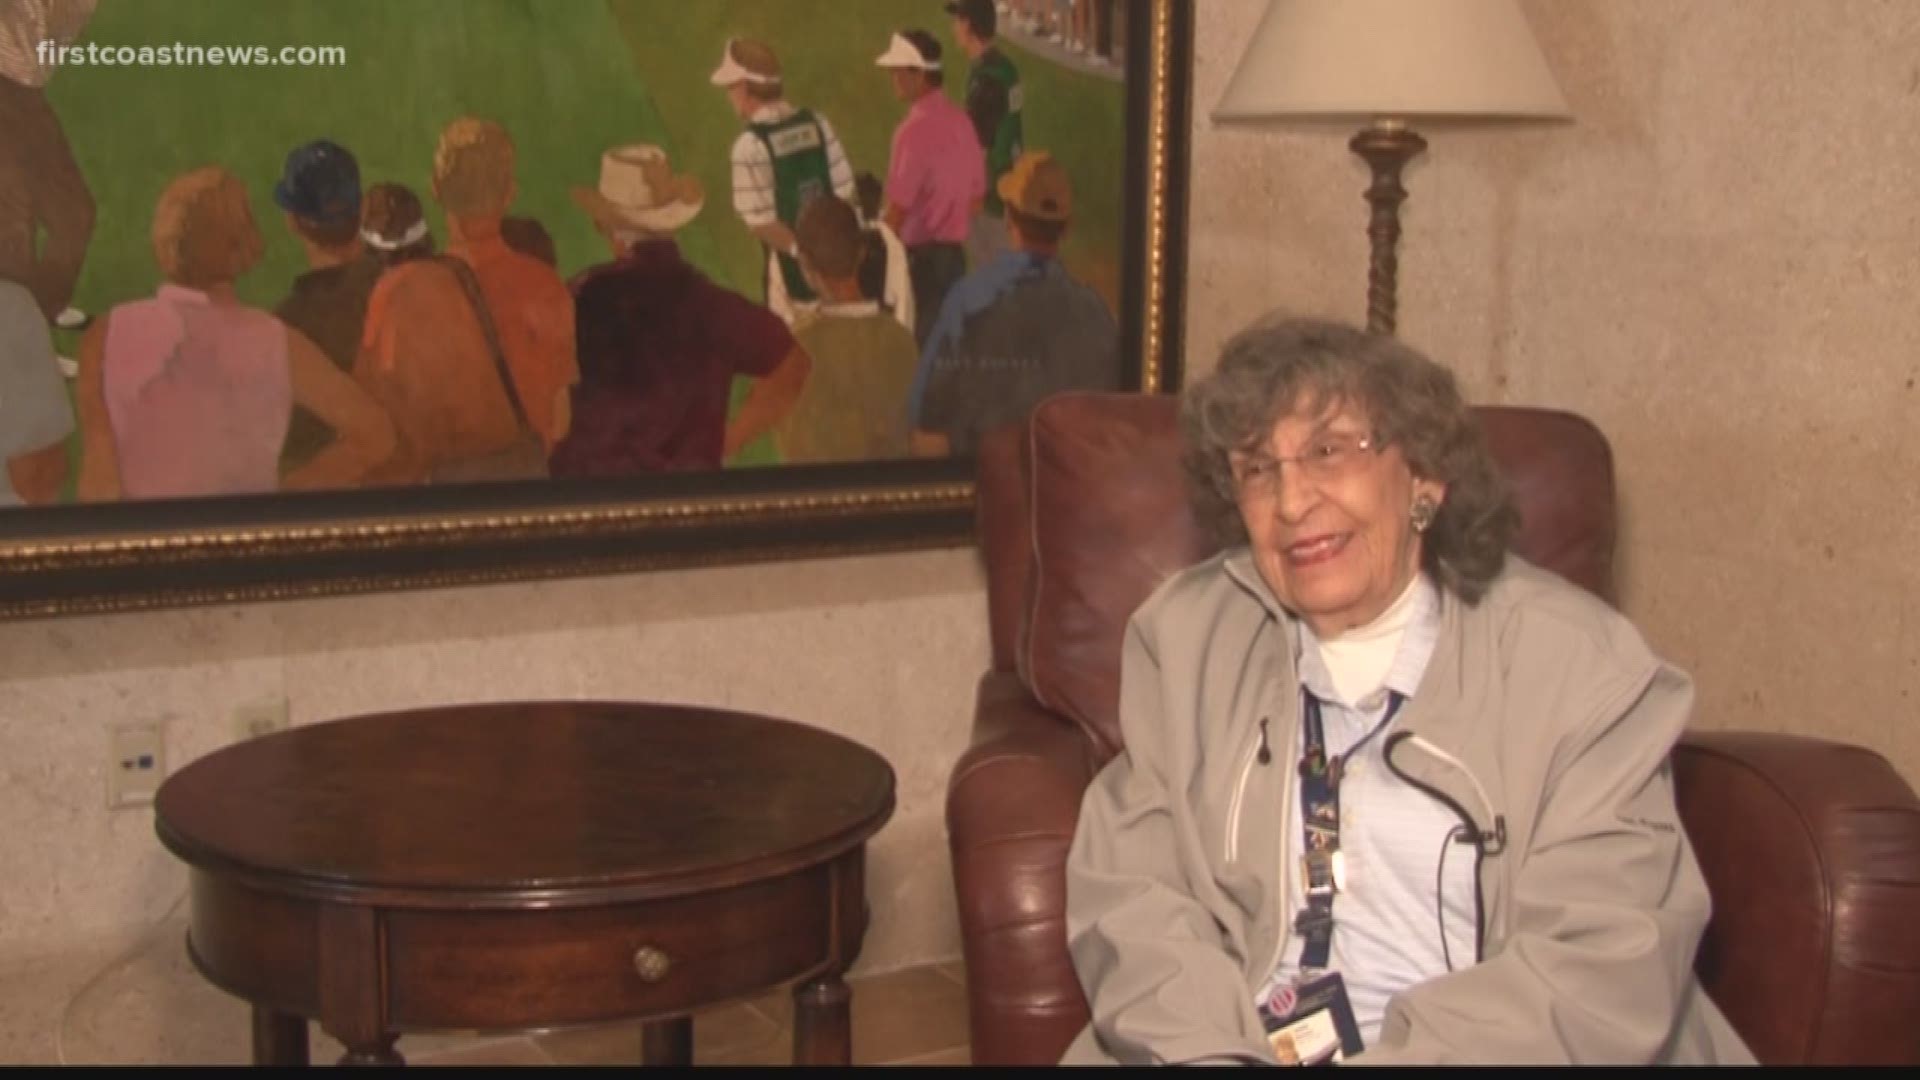 91-year old Stella Brown has been volunteering at The Players for 27 years -- and as she tells Mia O'Brien, it's been an "unFOREgettable" experience.